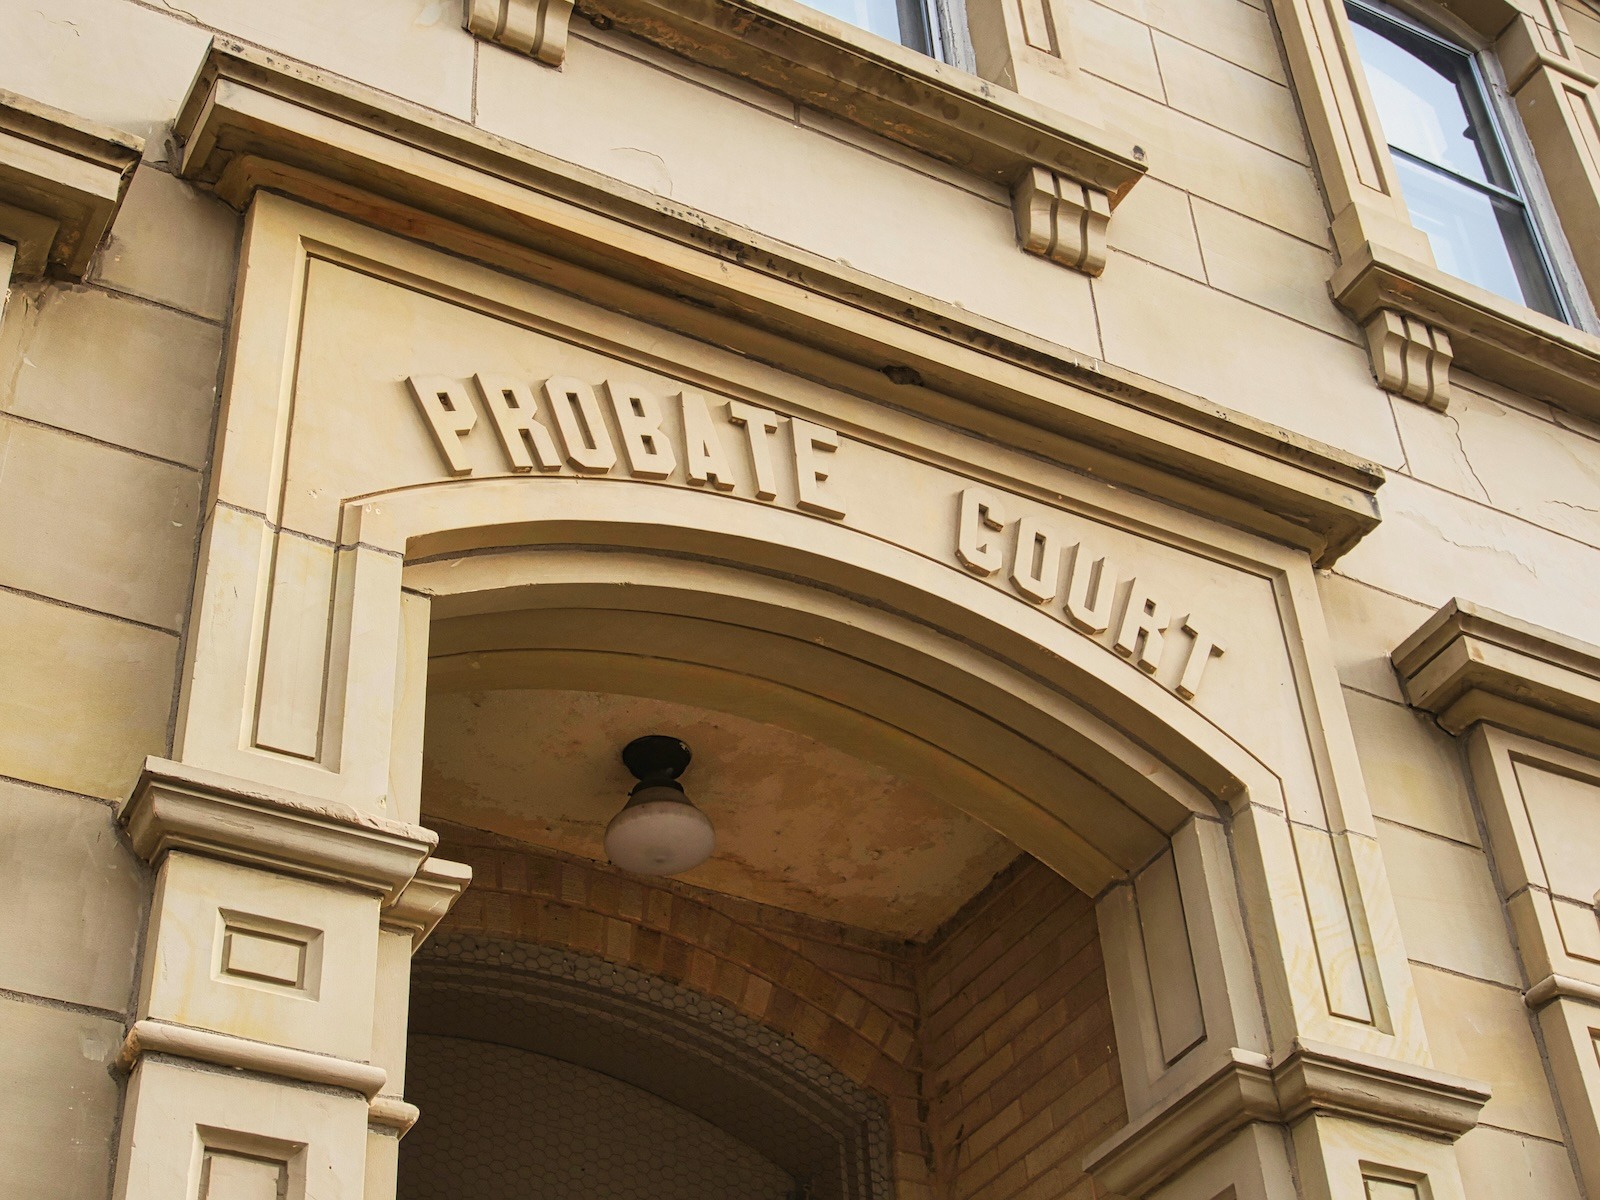 Estate Planning. What is Probate? An image of an olde court building with ‘PROBATE COURT’ written at the top of a tall arched entrance.